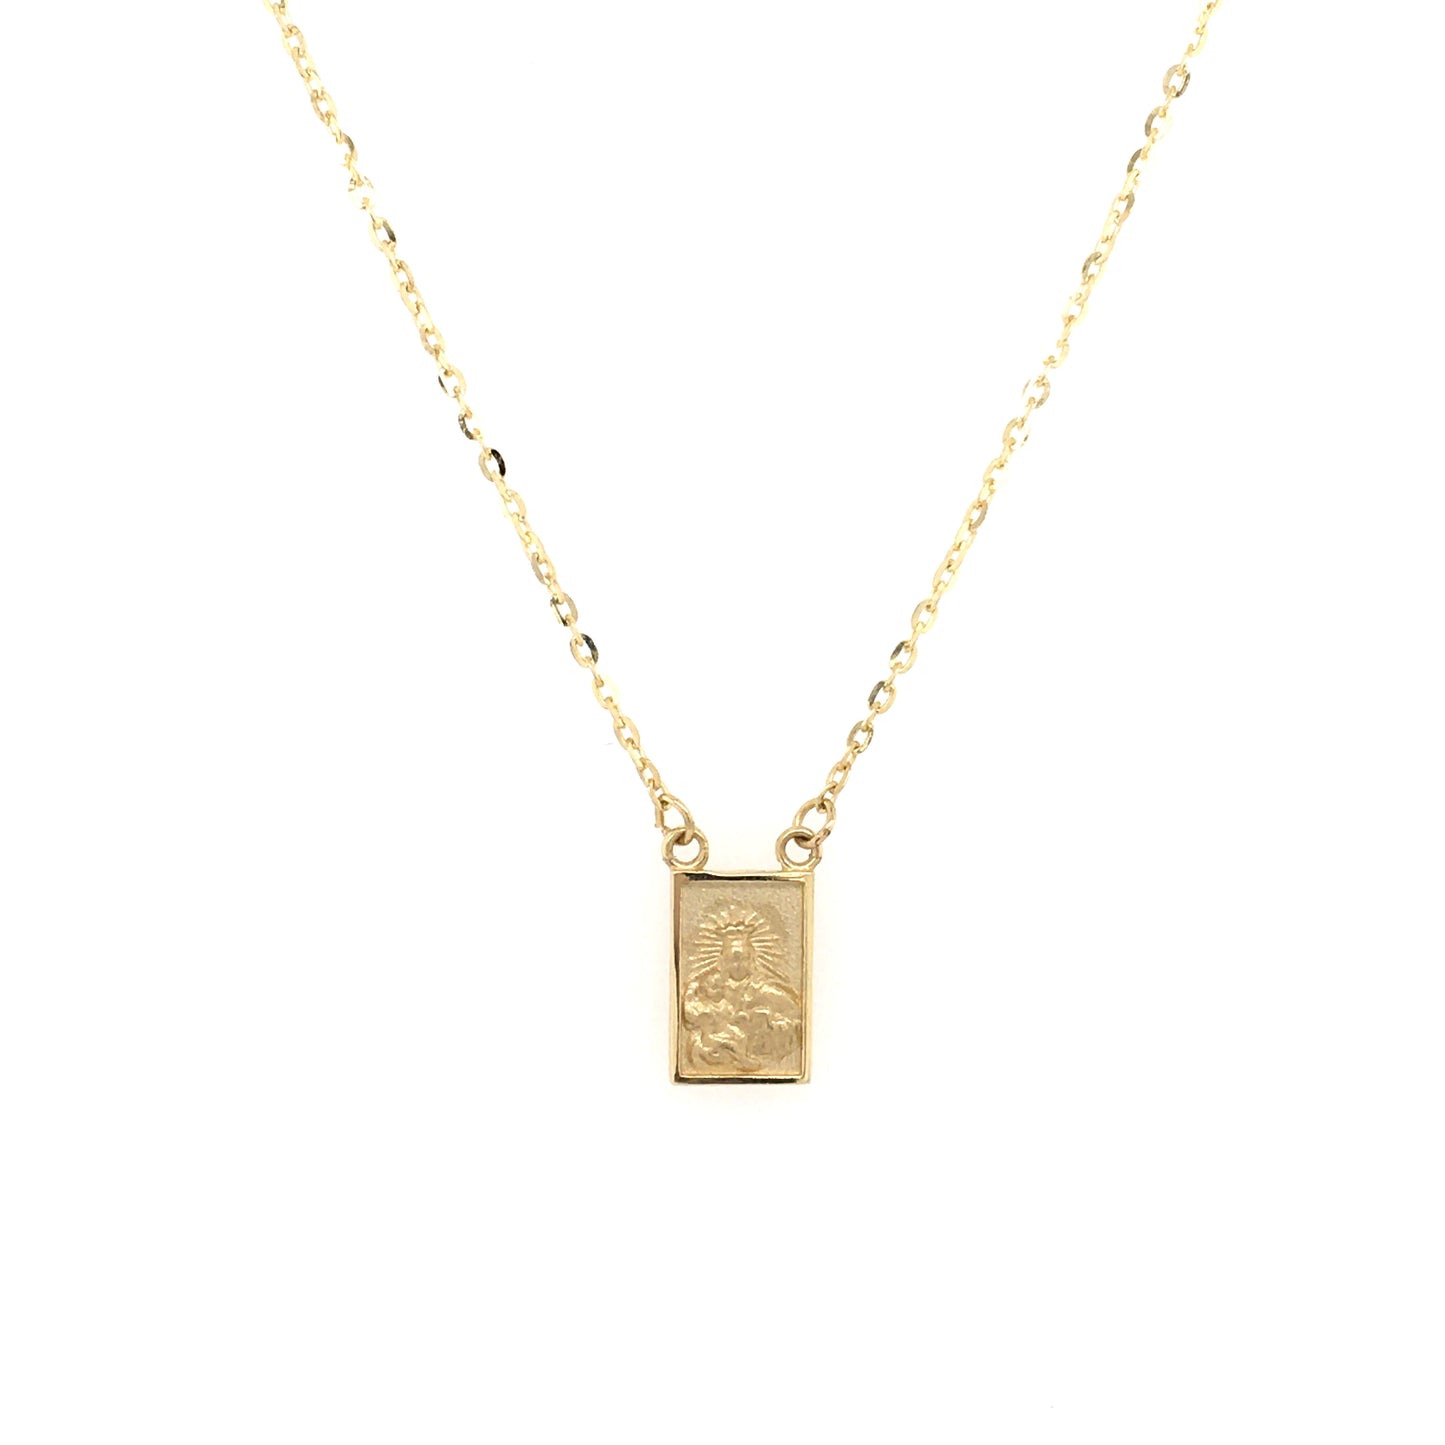 Single Small Scapular Medal Necklace